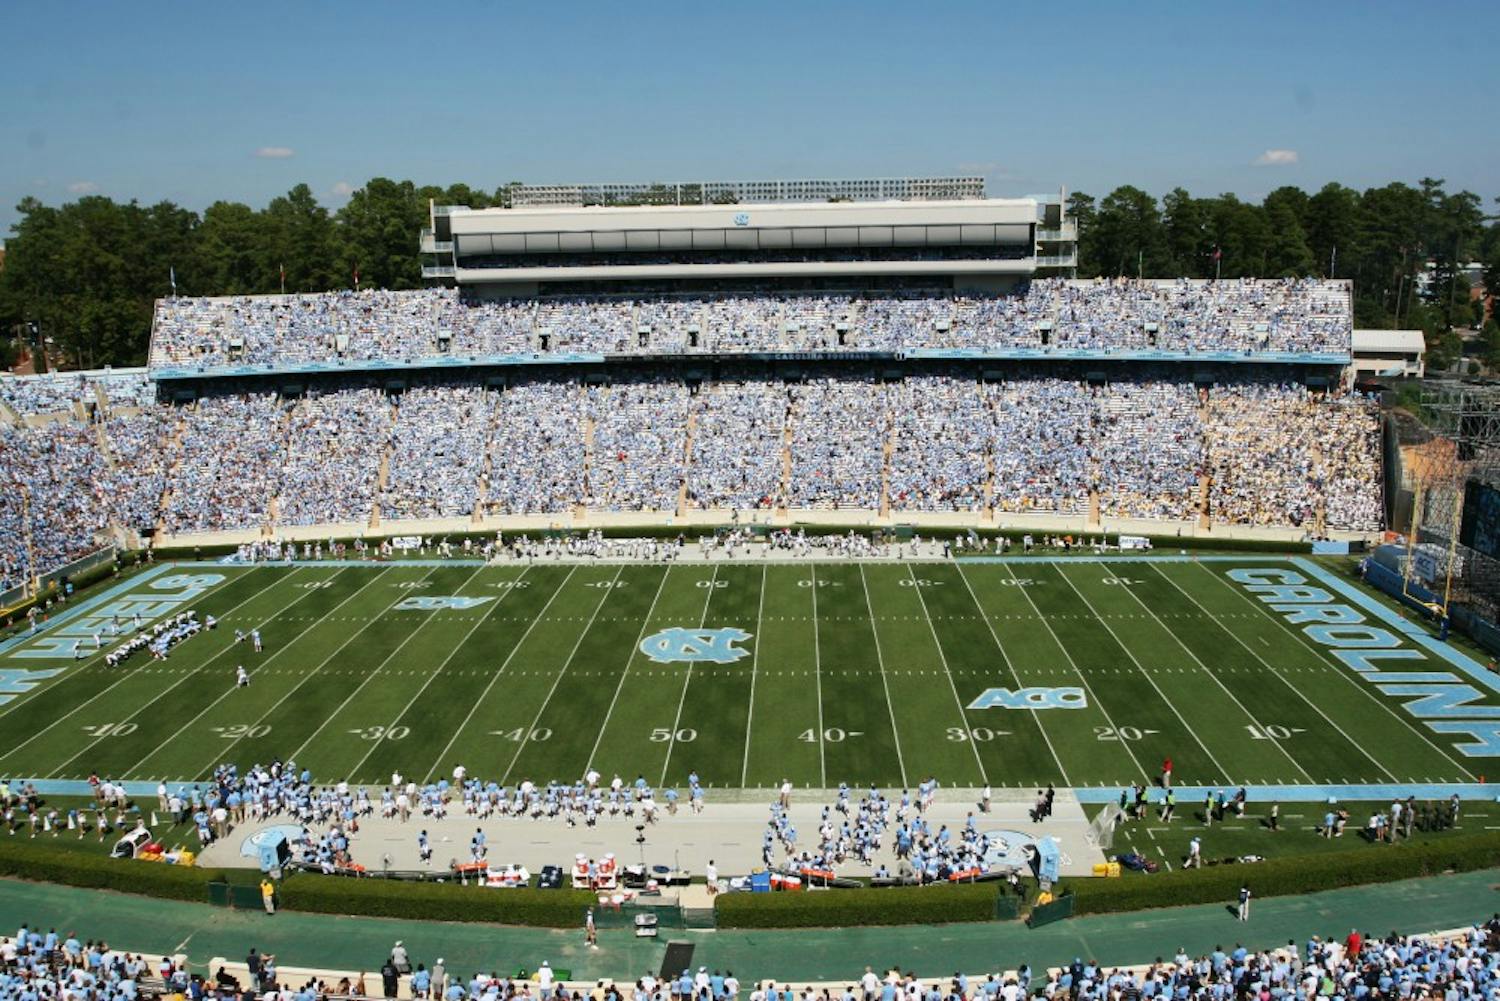 Kenan Stadium played host to 58,500 fans for the home opener against Georgia Tech.